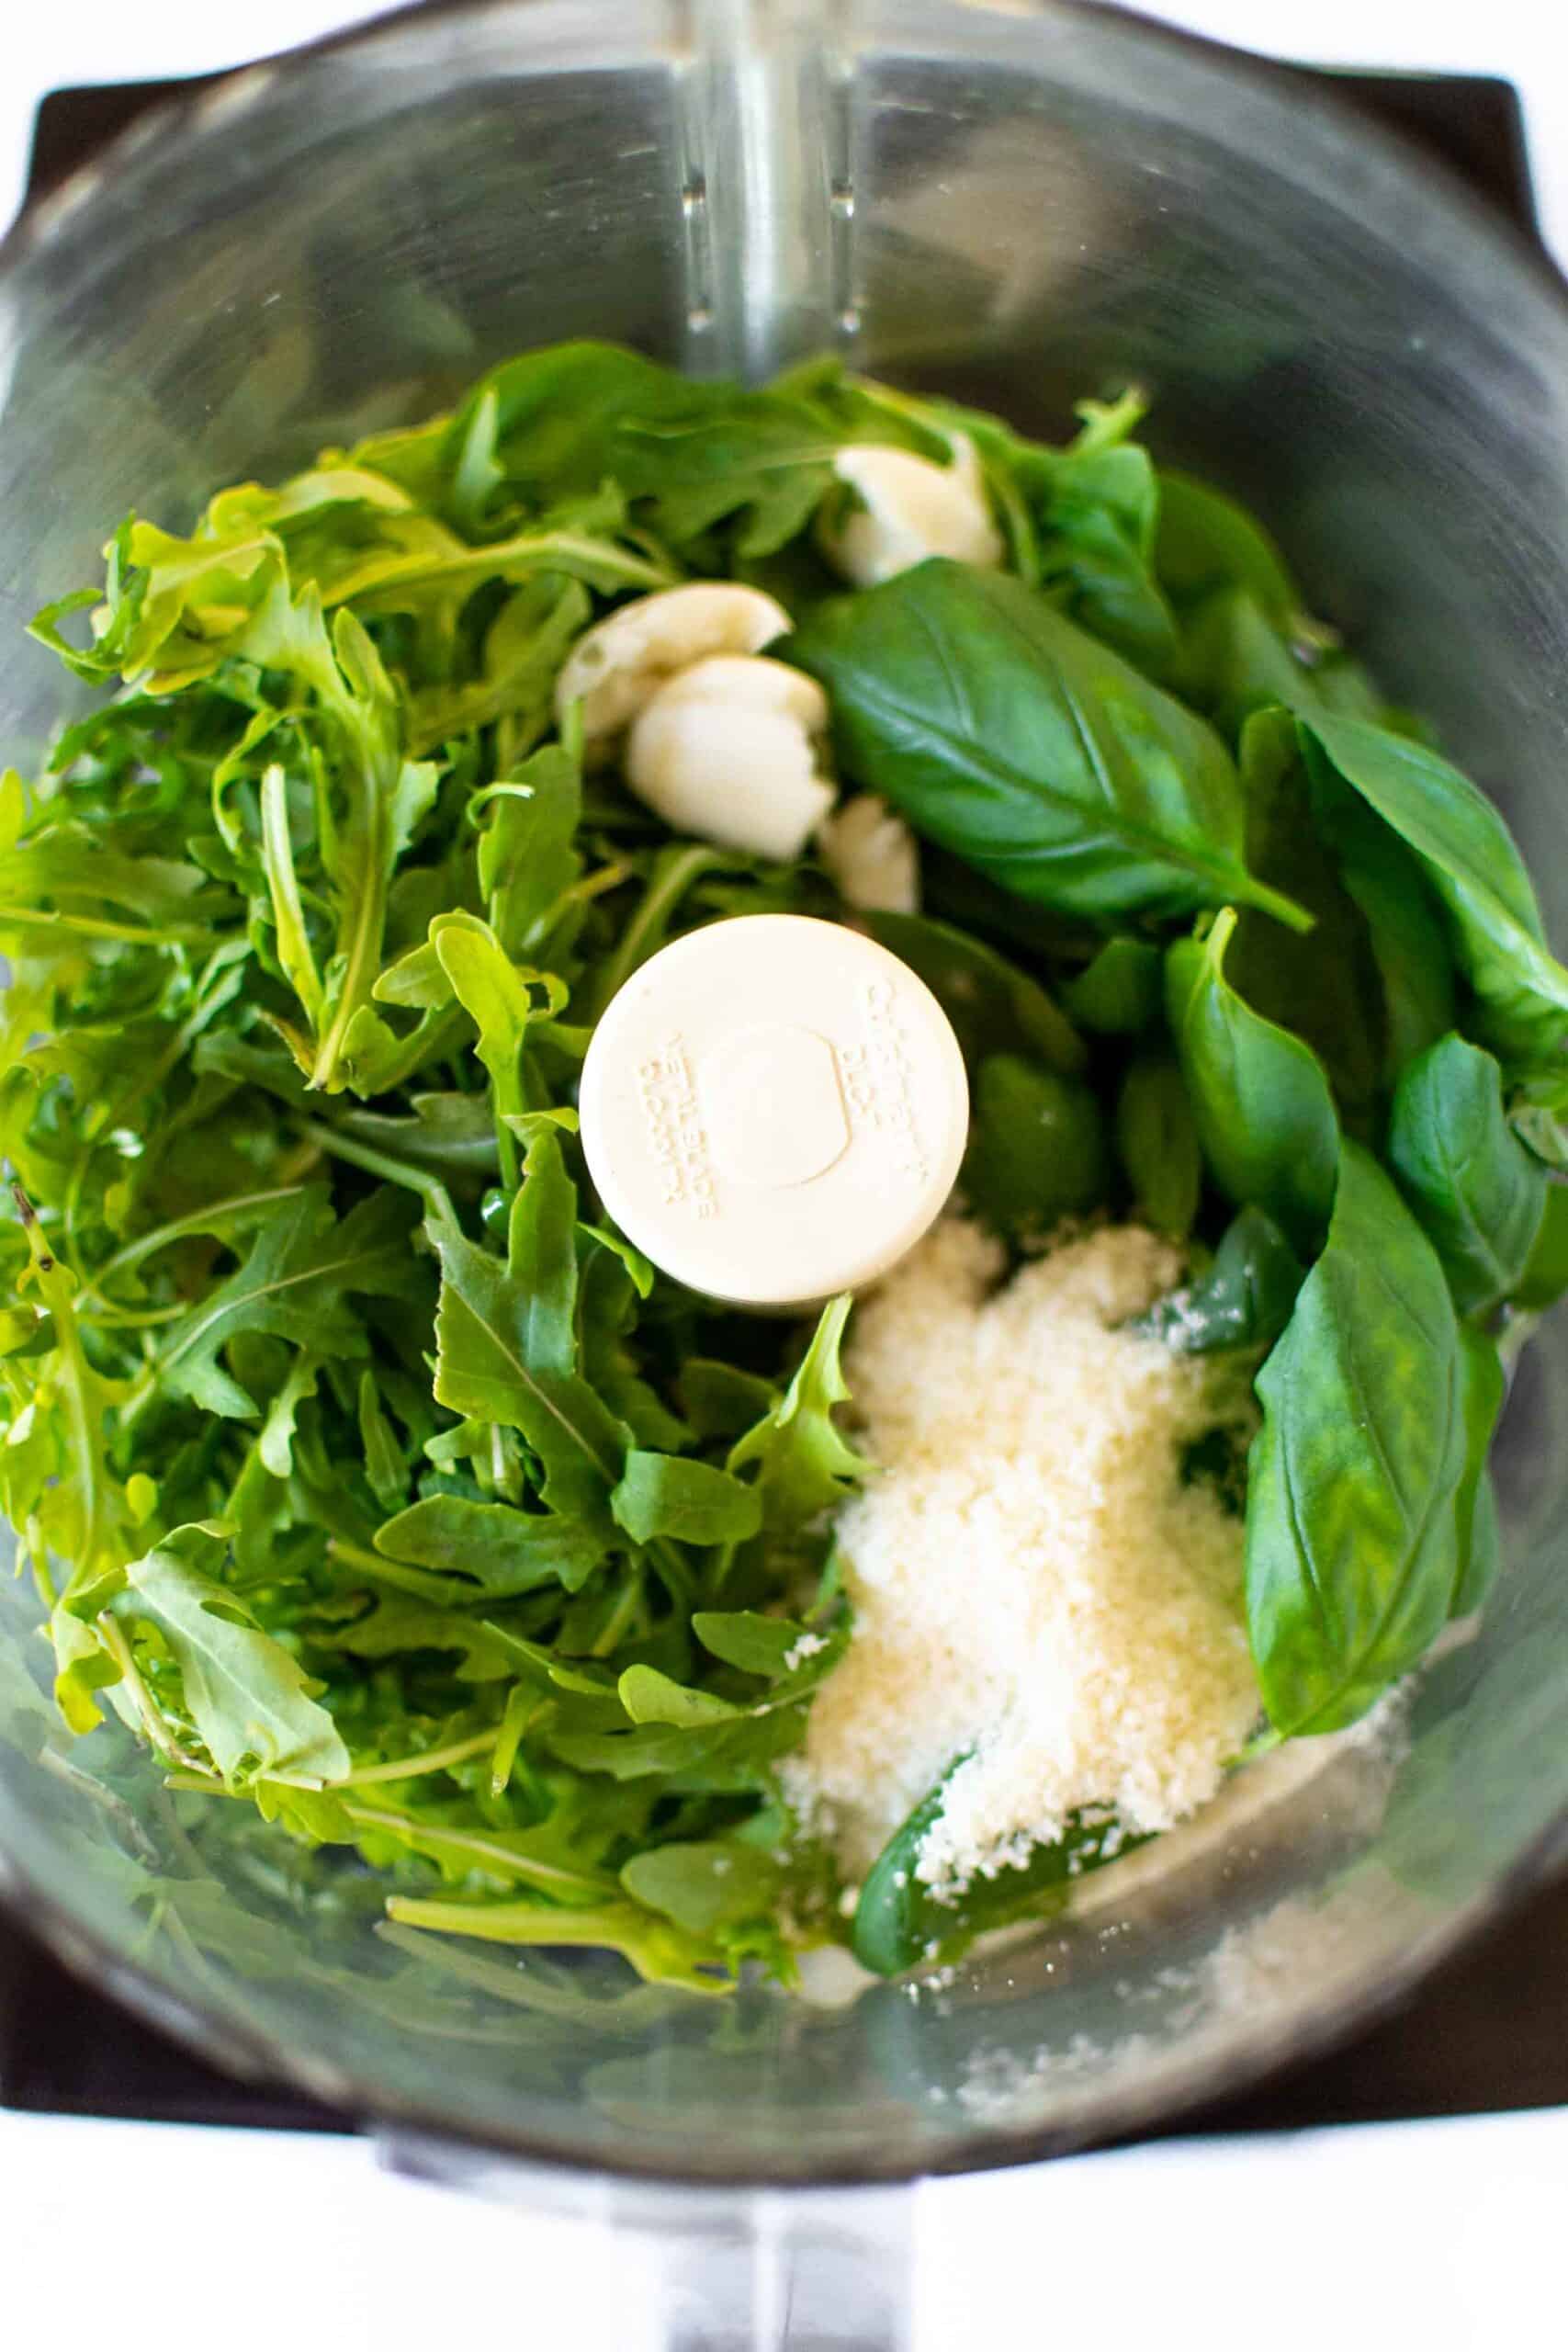 How to make Basil Arugula Pesto Step 1. All ingredients in the food processor.